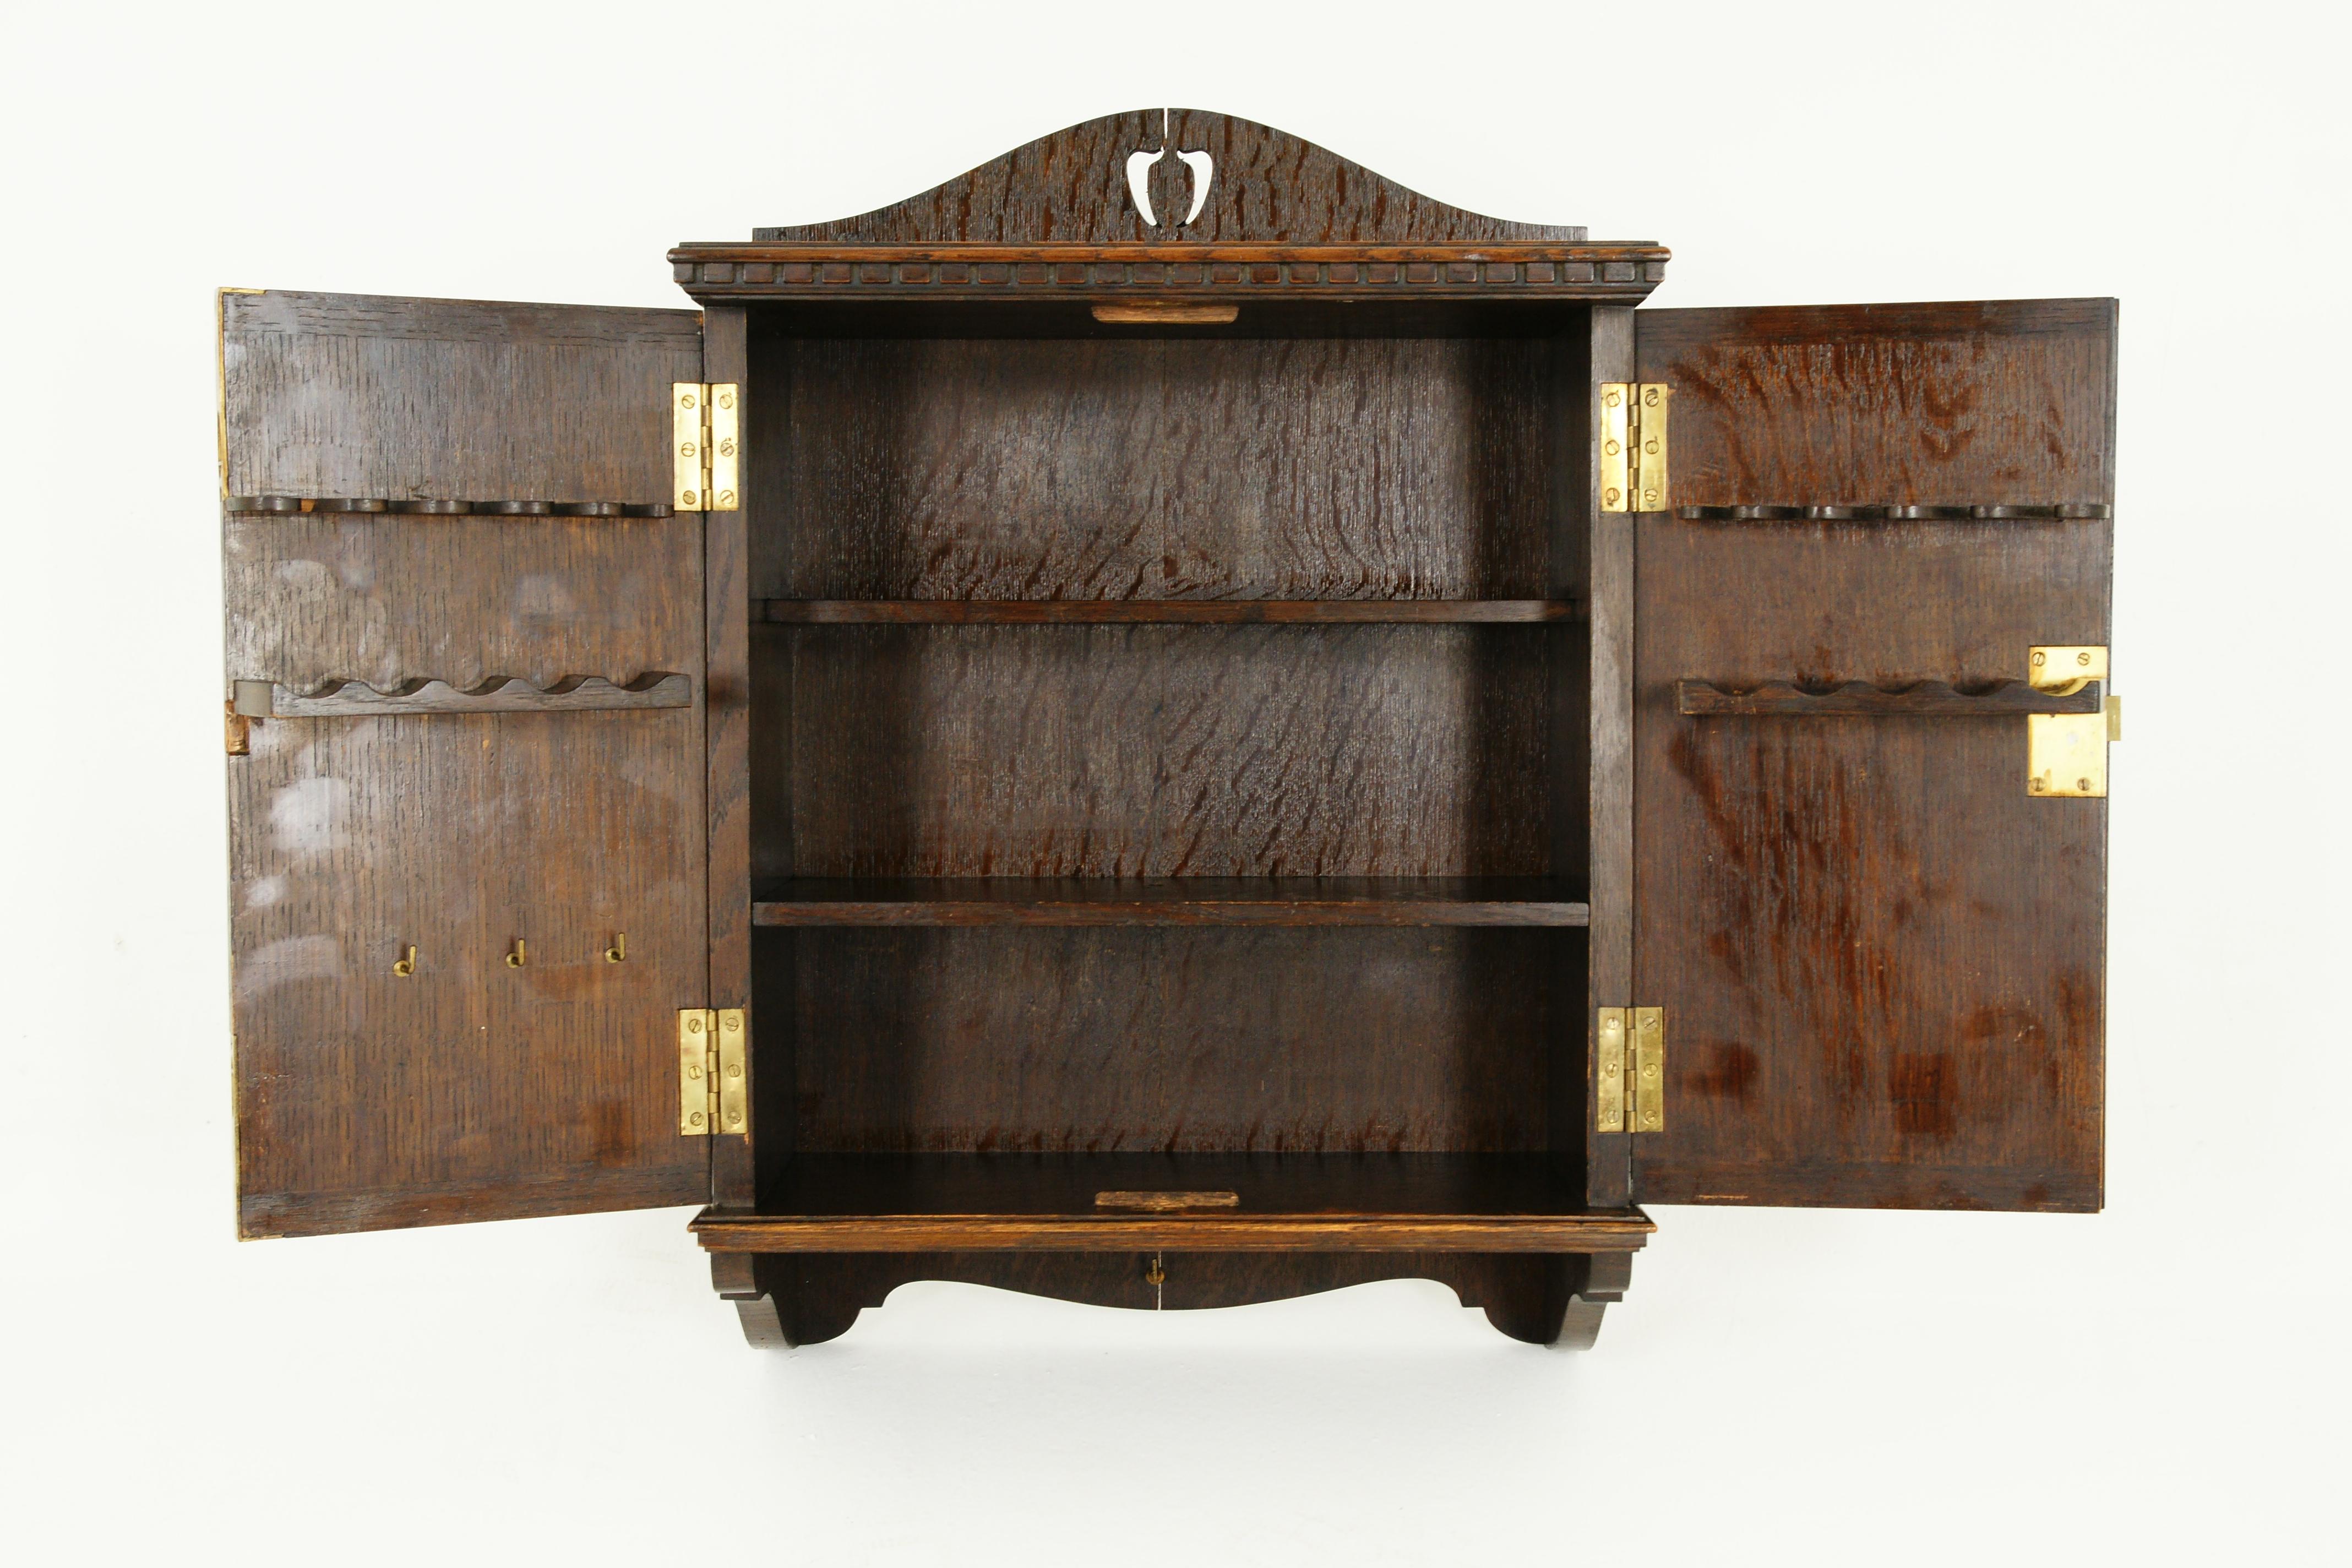 Scottish Antique Smokers Cabinet, Carved Tiger Oak, Humidor, Pipe Rack, Scotland, 1910